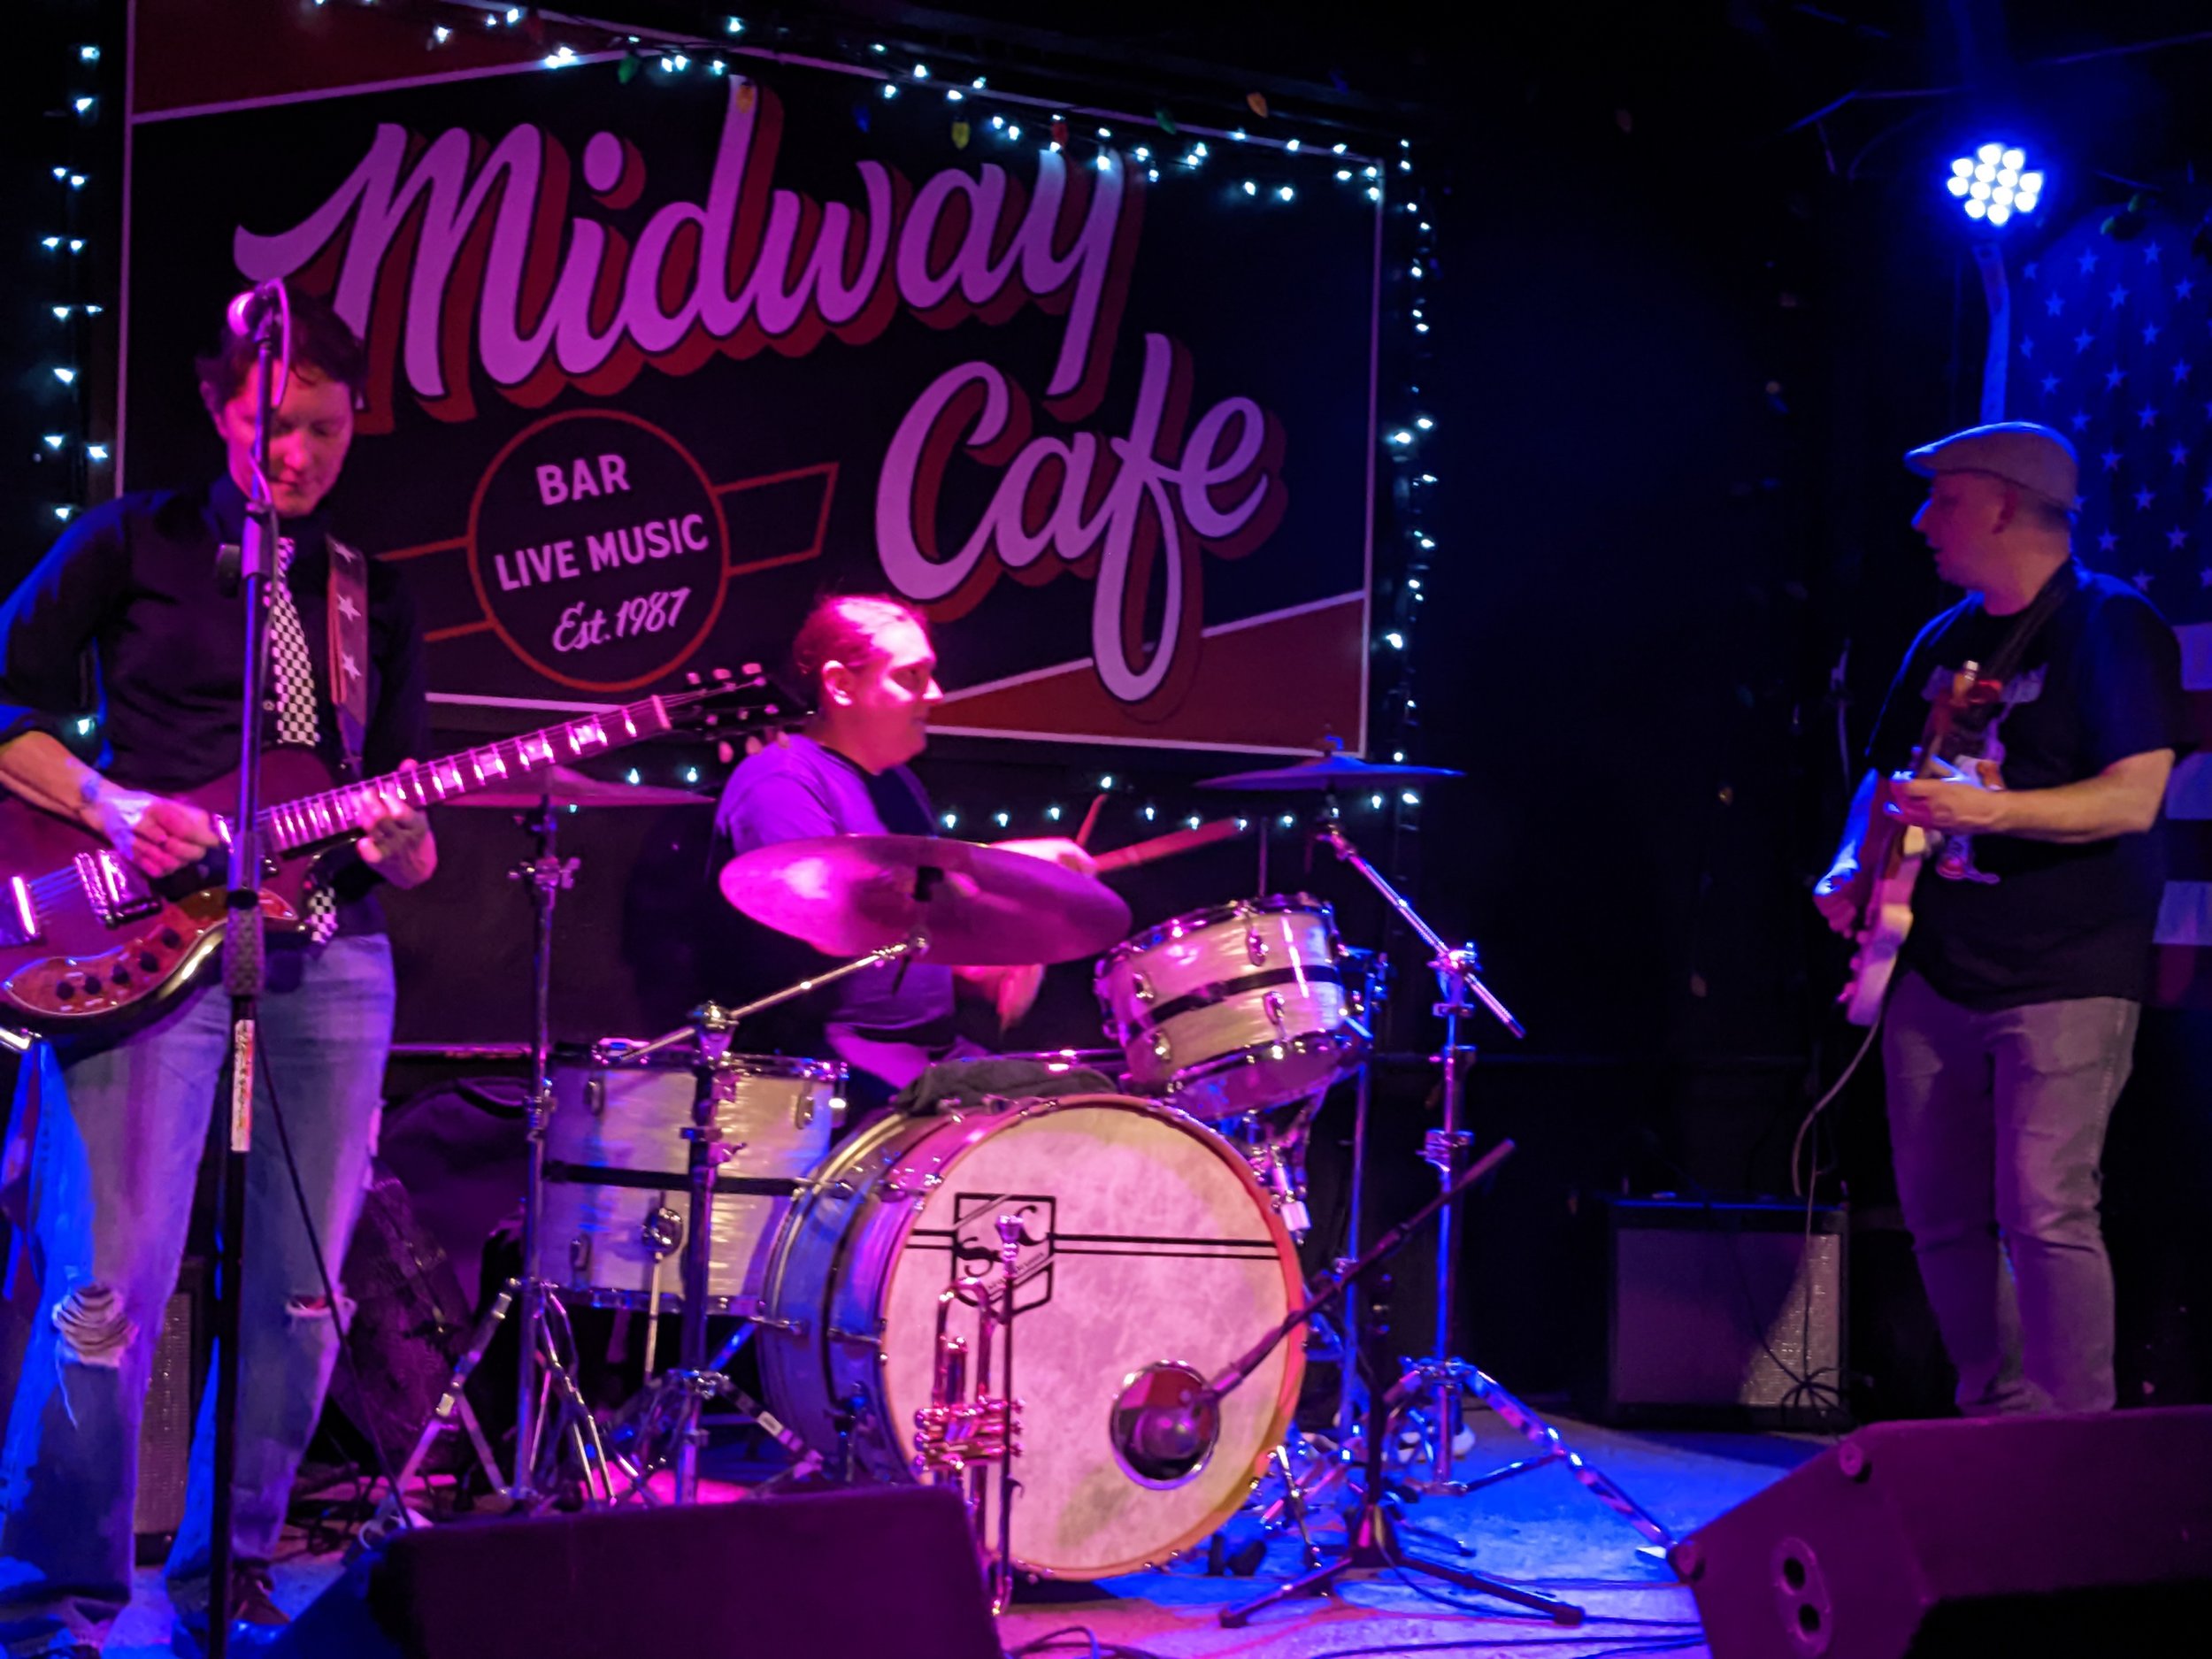 221203_midway cafe_double star (3).jpg